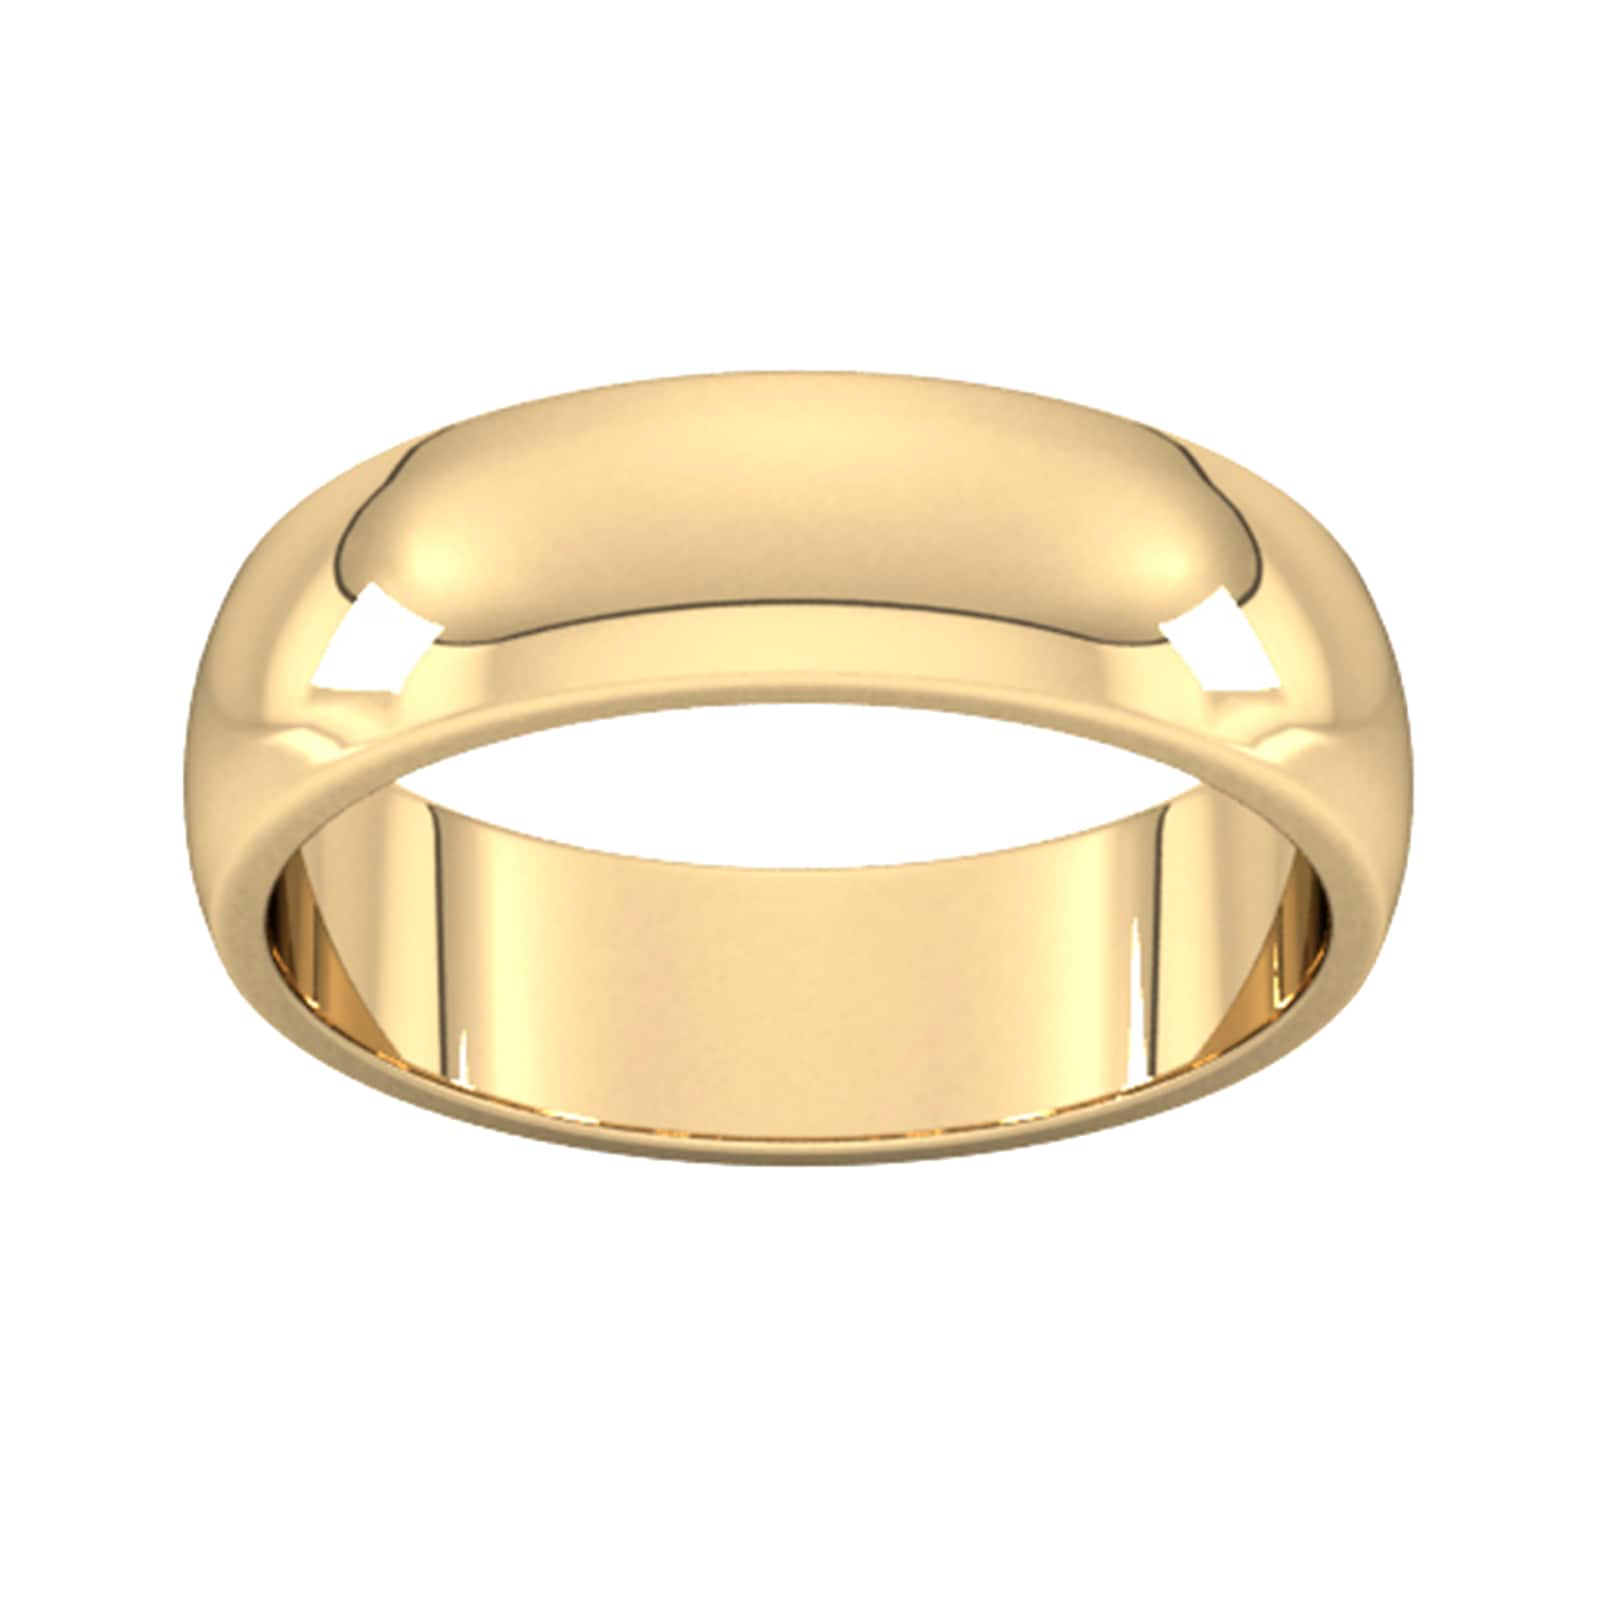 6mm D Shape Heavy Wedding Ring In 9 Carat Yellow Gold - Ring Size H